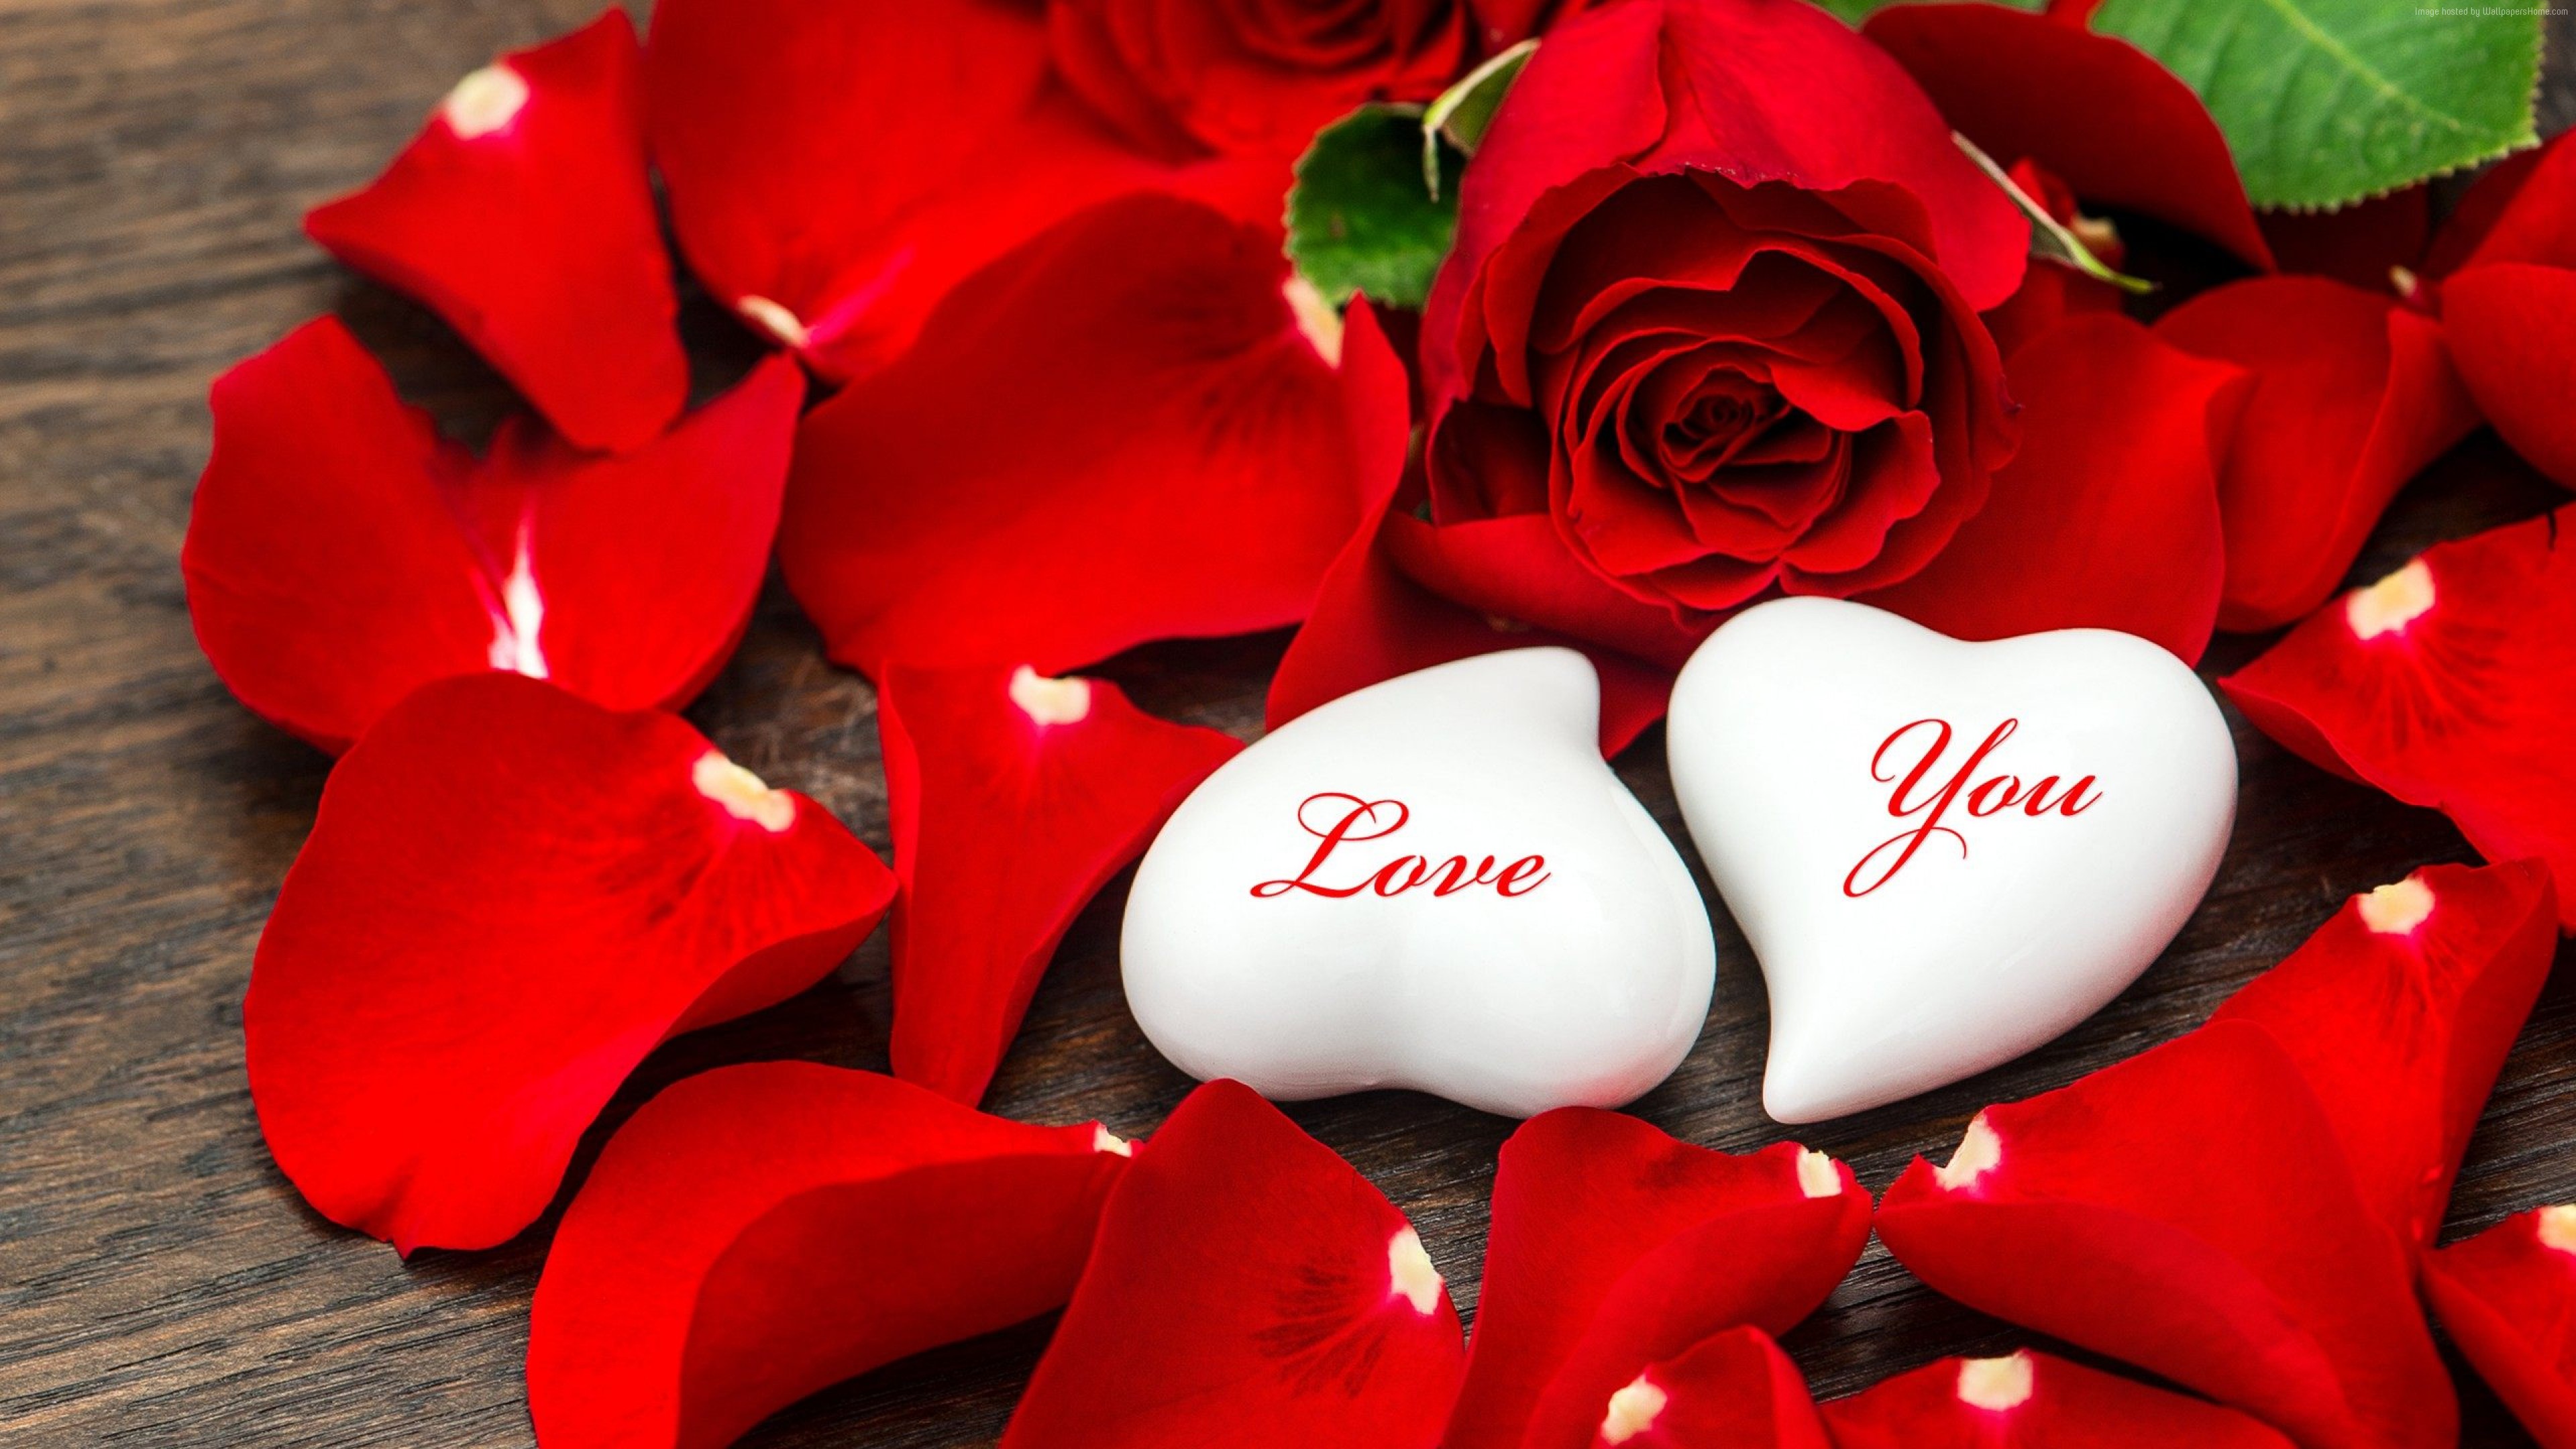 Stock Images love image, heart, HD, Stock Images